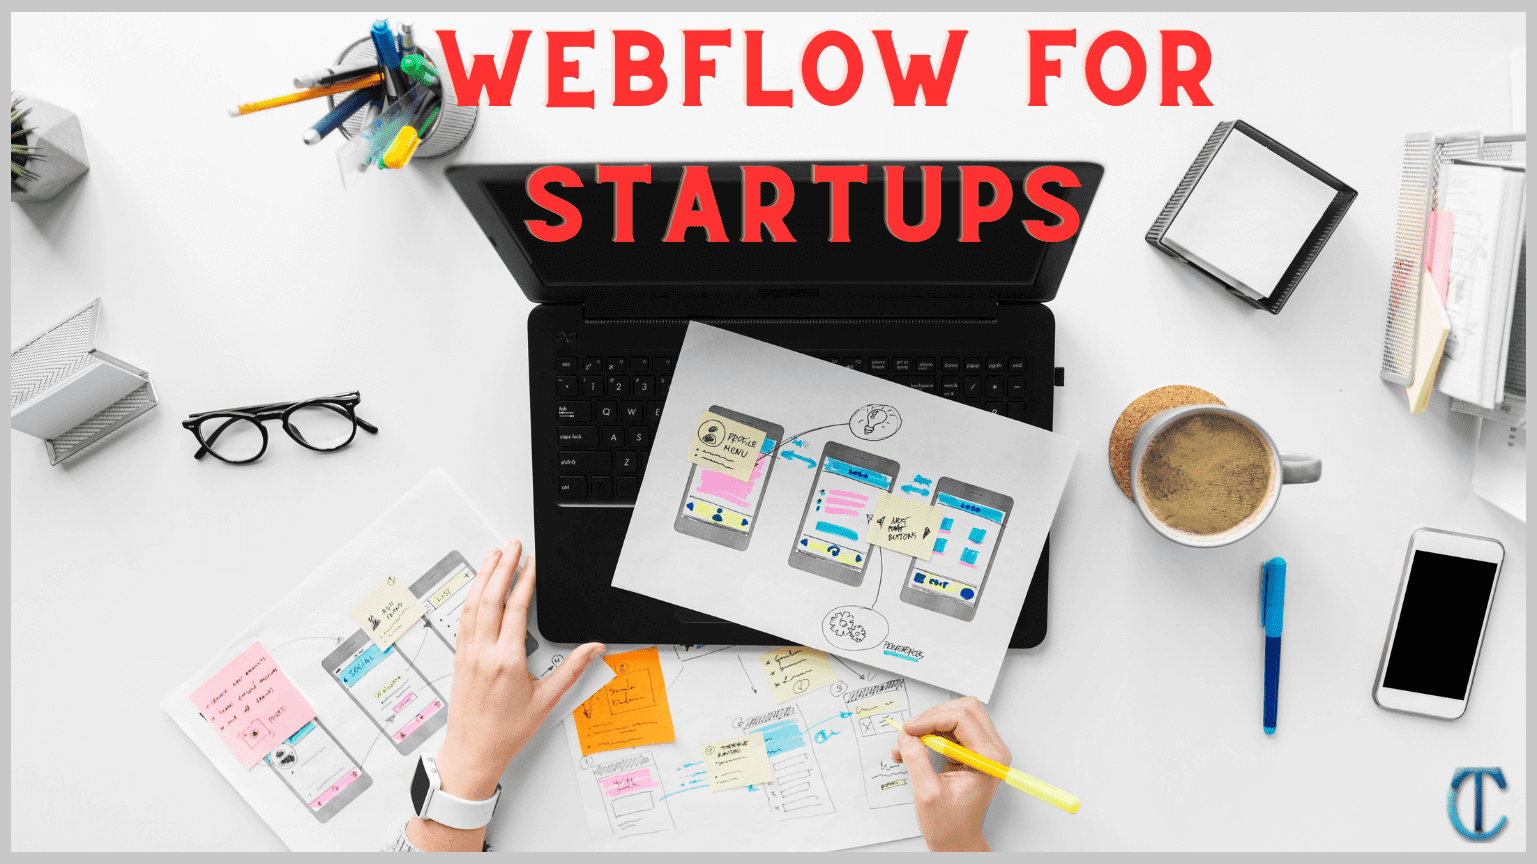 Webflow - what is this, and how can it be useful